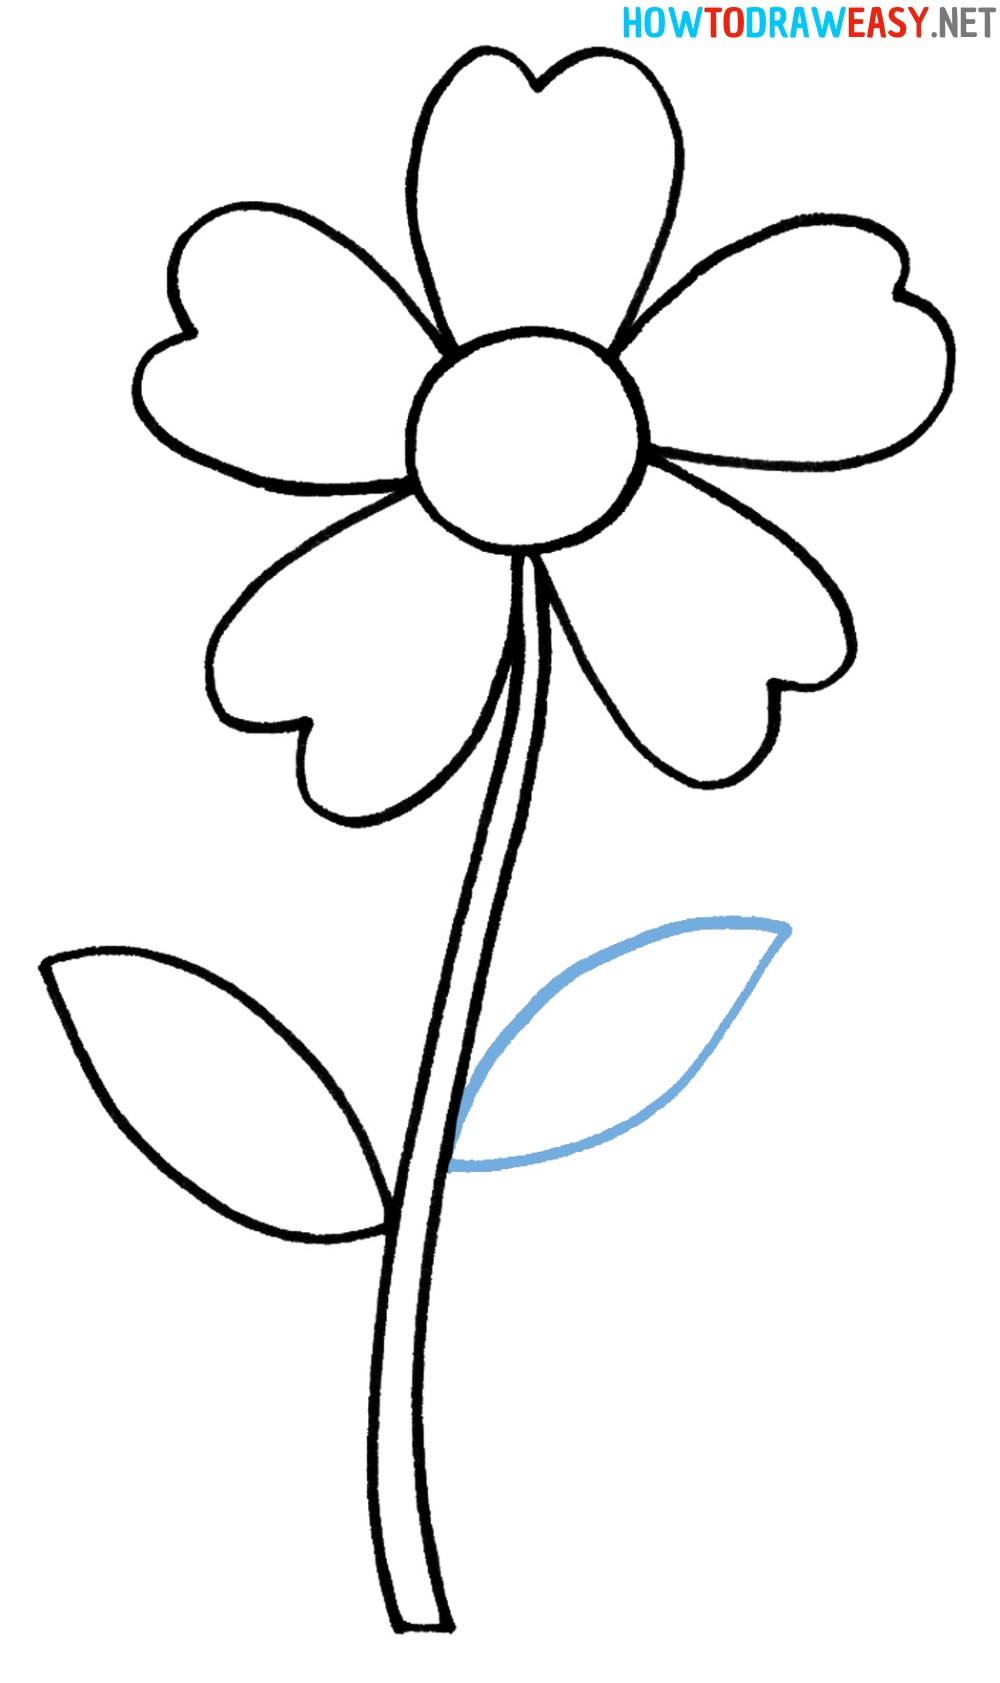 How to Draw an Easy Flower